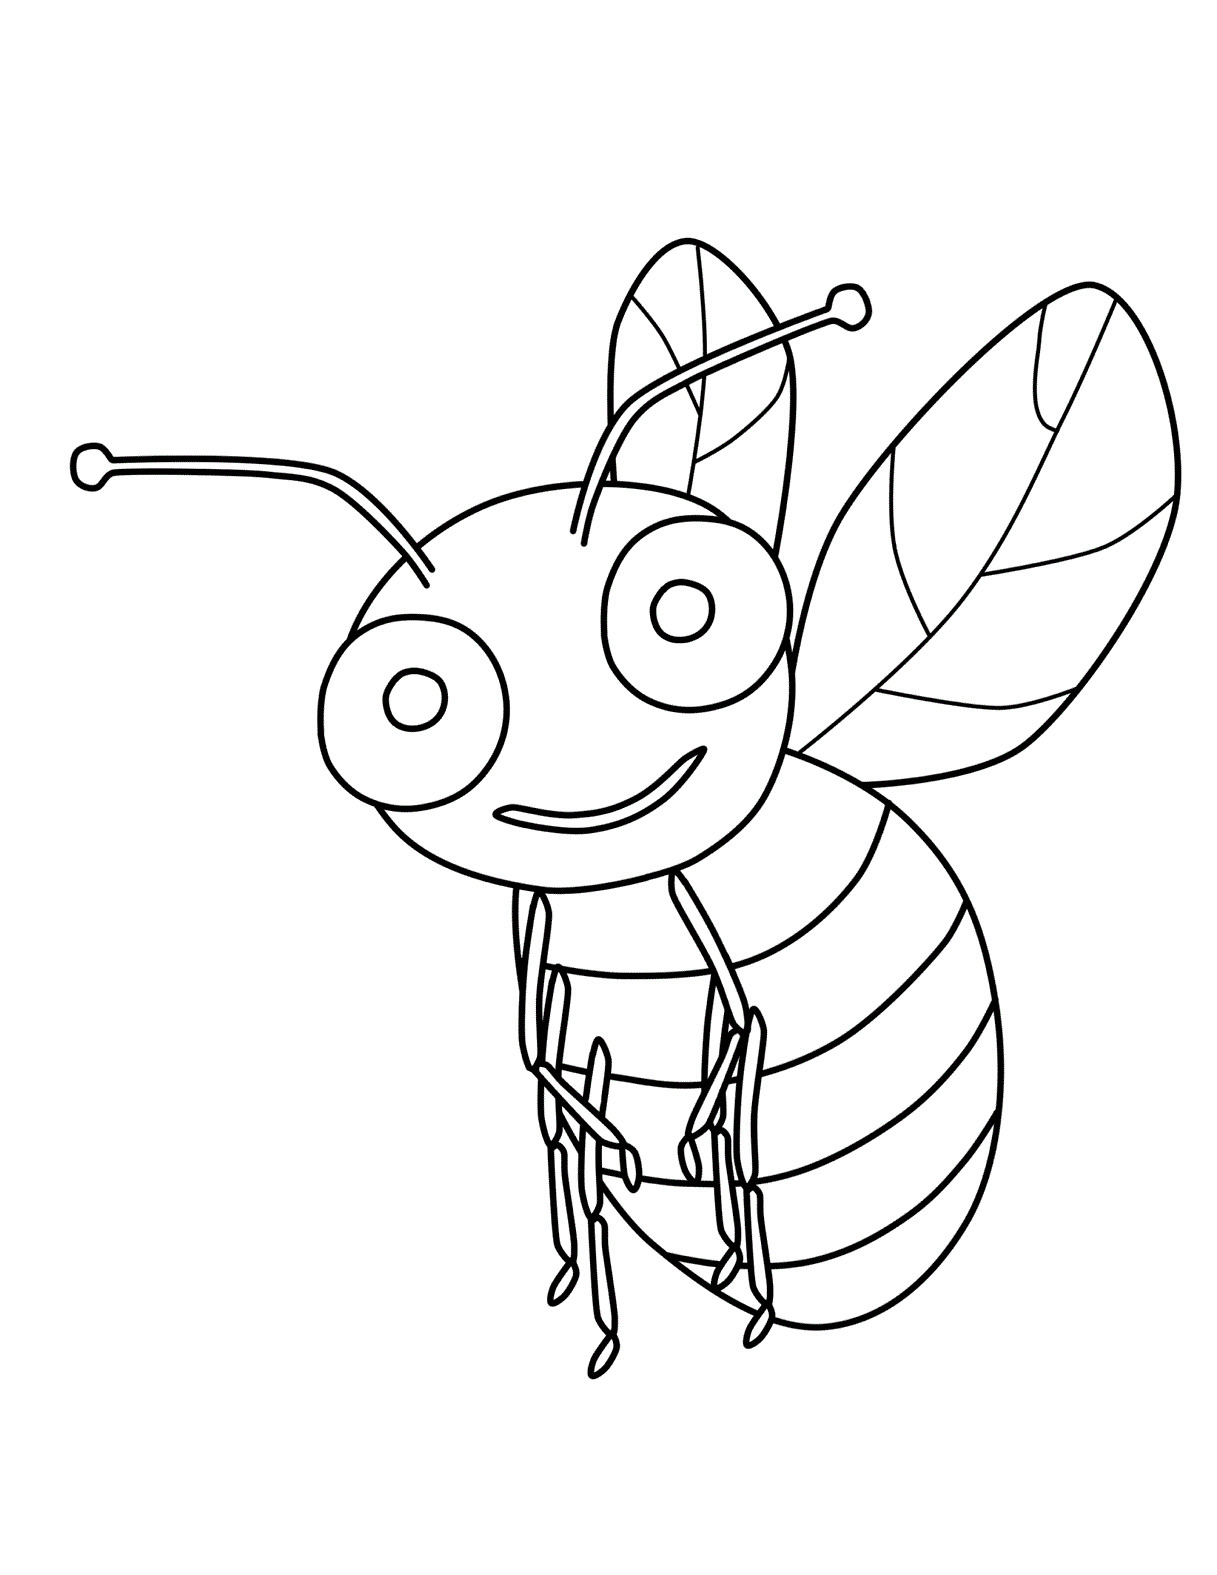 Printable Coloring Pages For Toddlers
 Free Printable Bumble Bee Coloring Pages For Kids